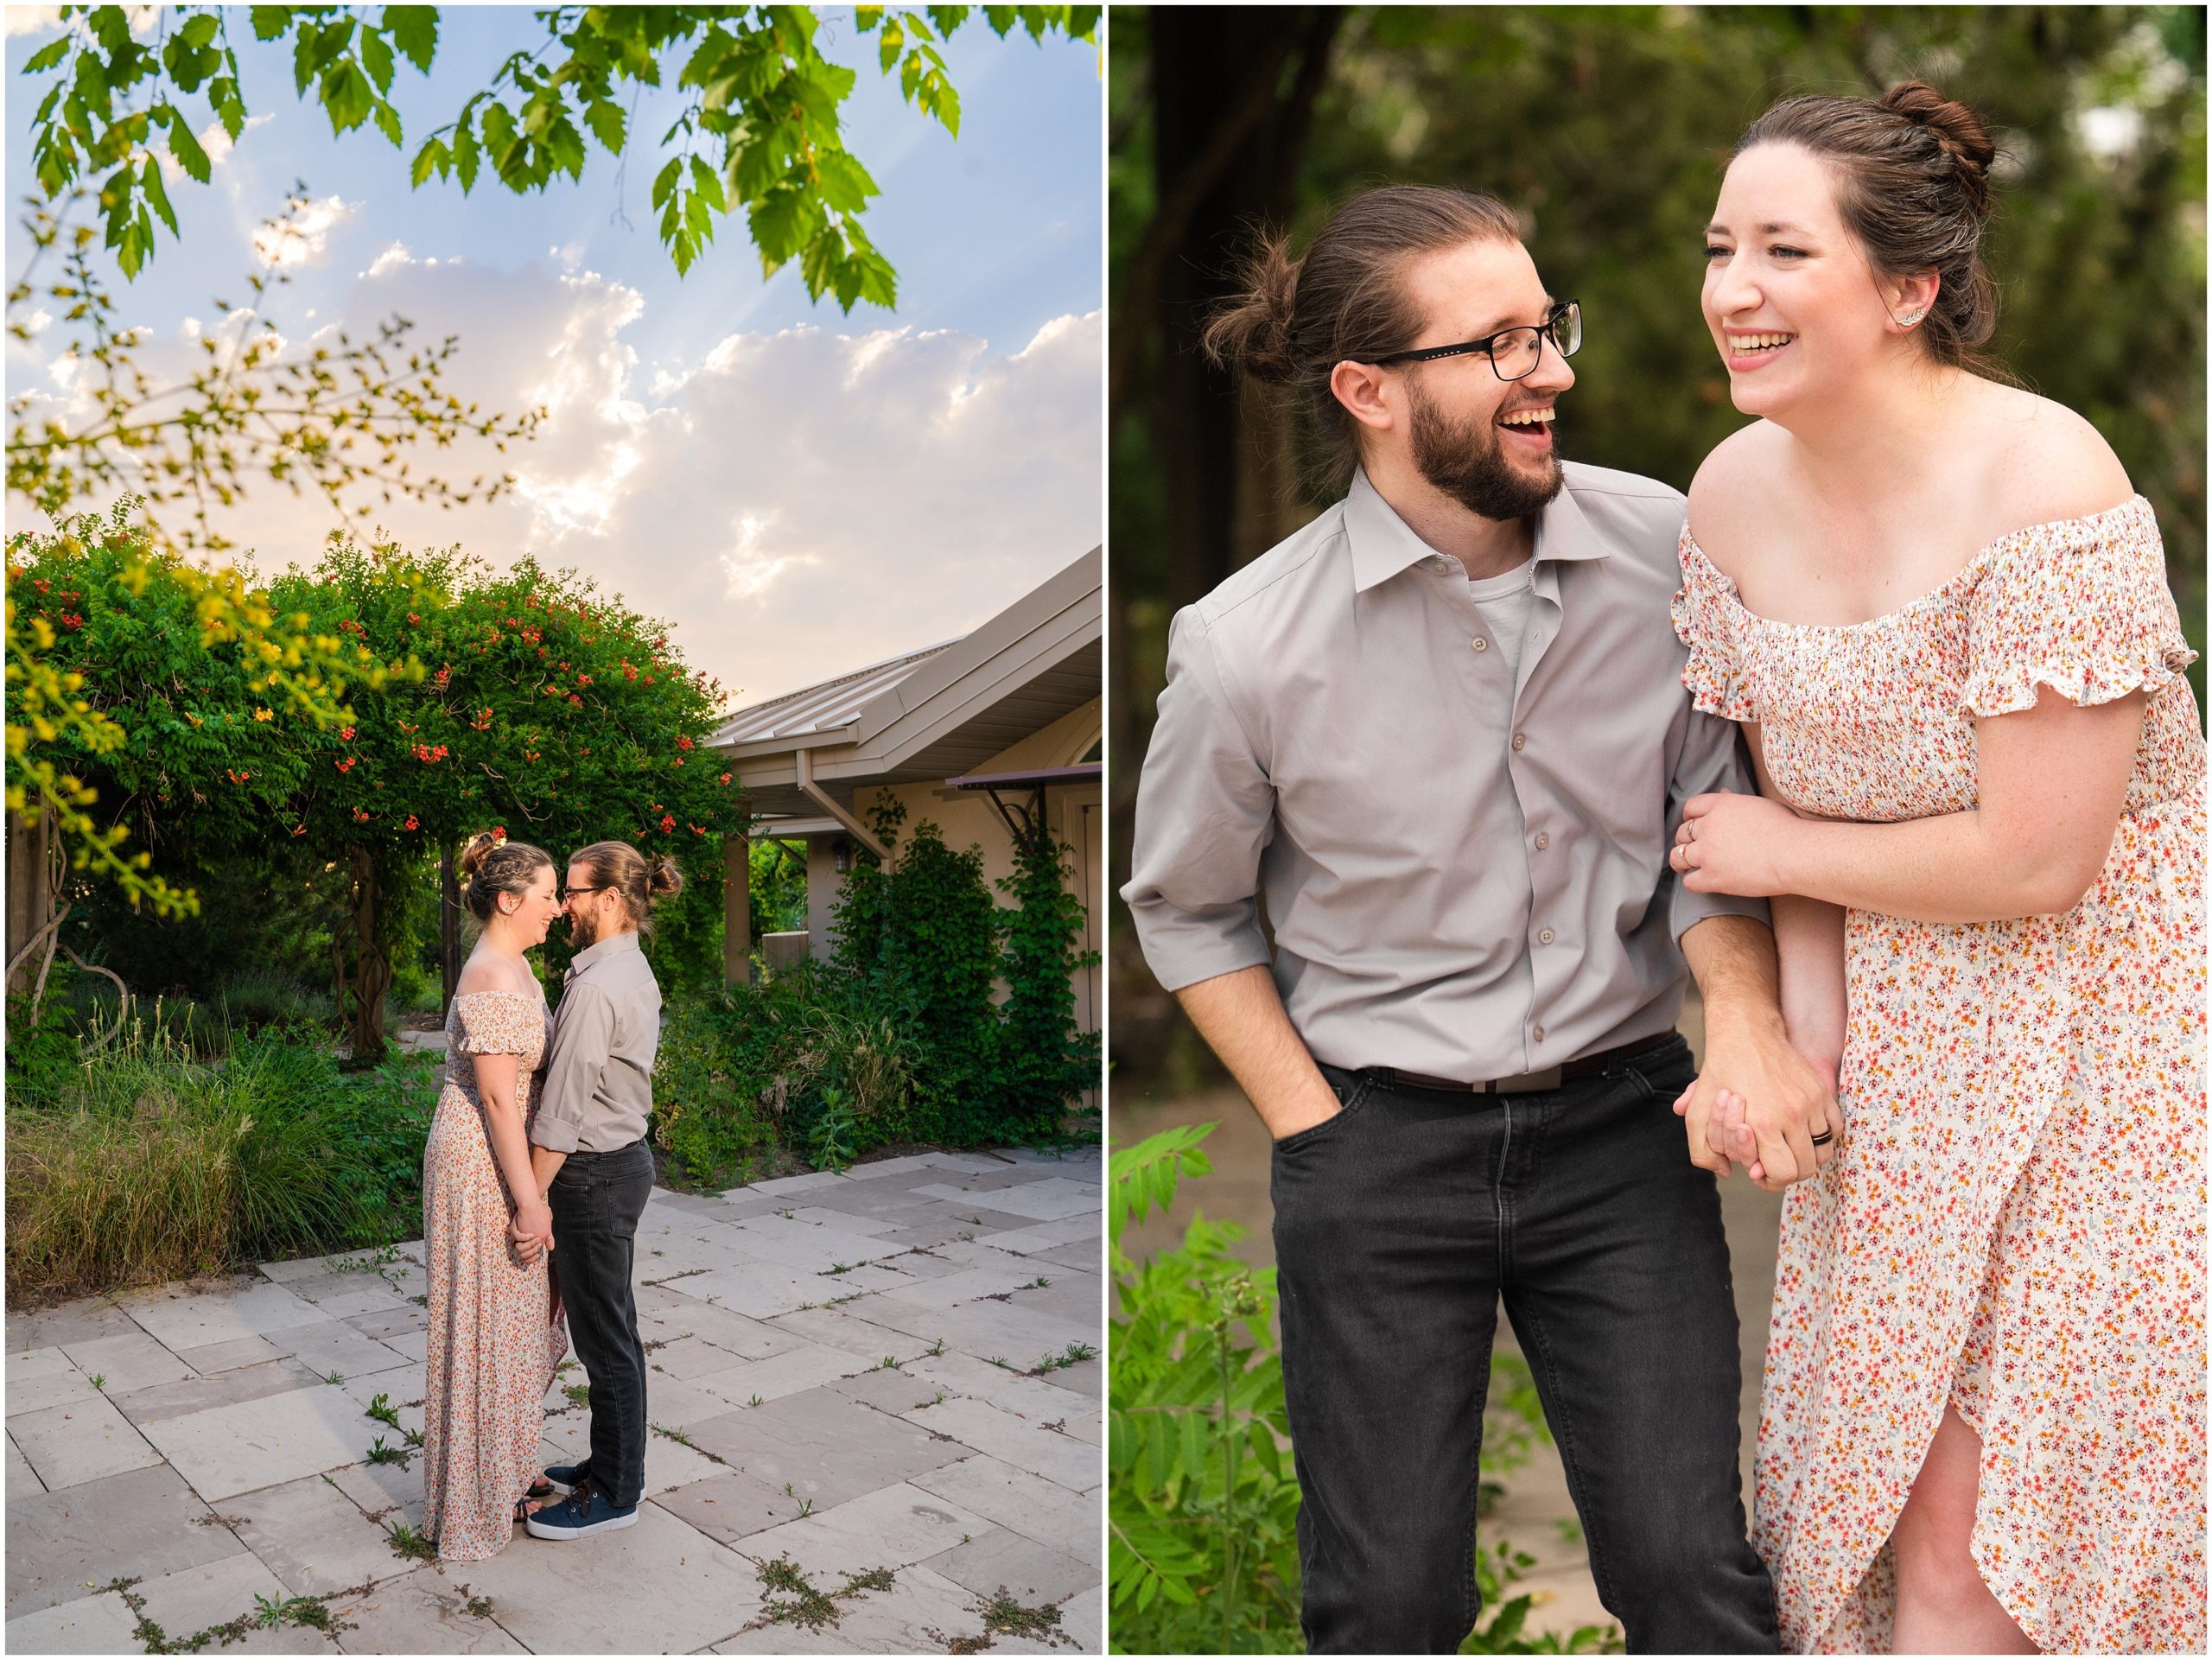 Couple laughing and having fun with an incredible sky during Utah Botanical Garden Engagement | Jessie and Dallin Photography